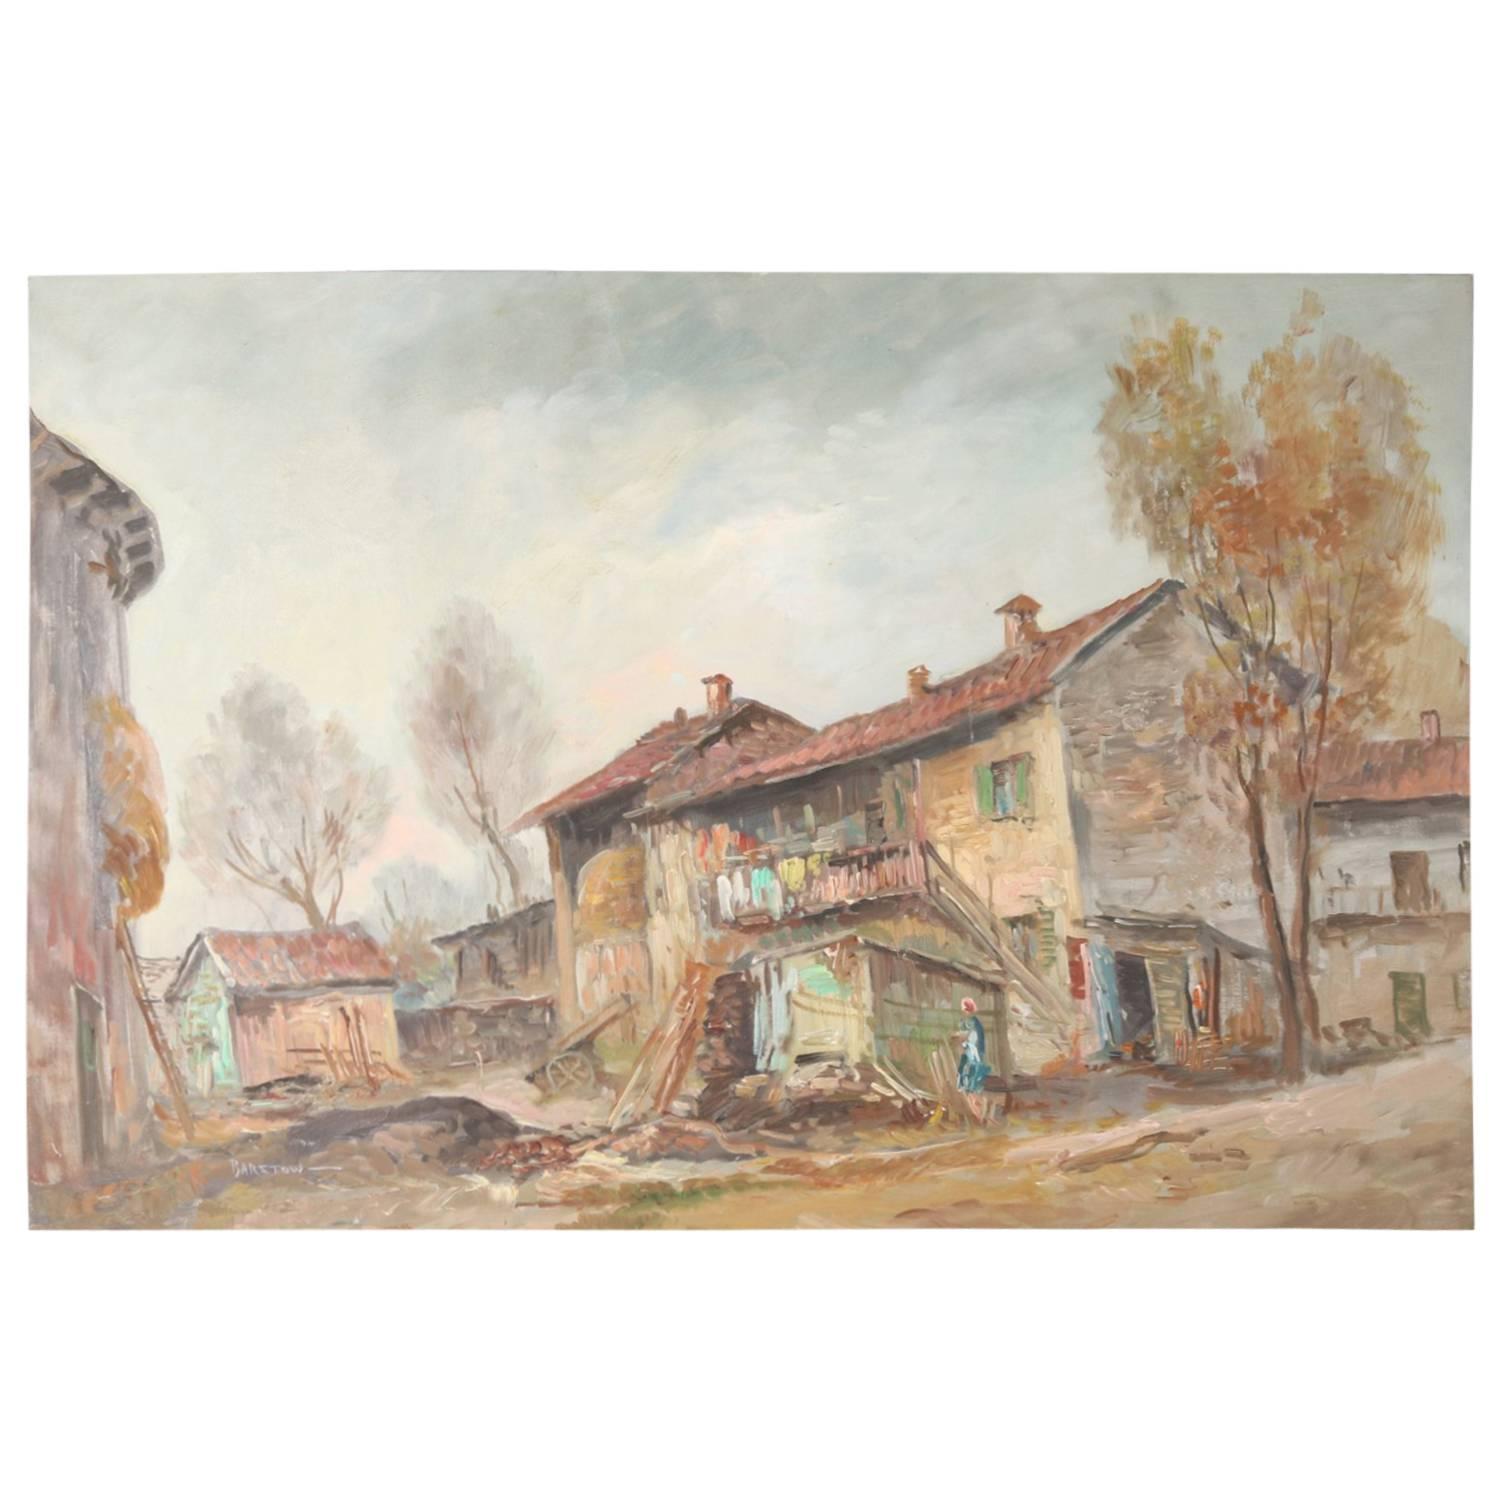 Vintage Oil on Canvas Rural Eastern European Painting by Barstow, 20th Century For Sale